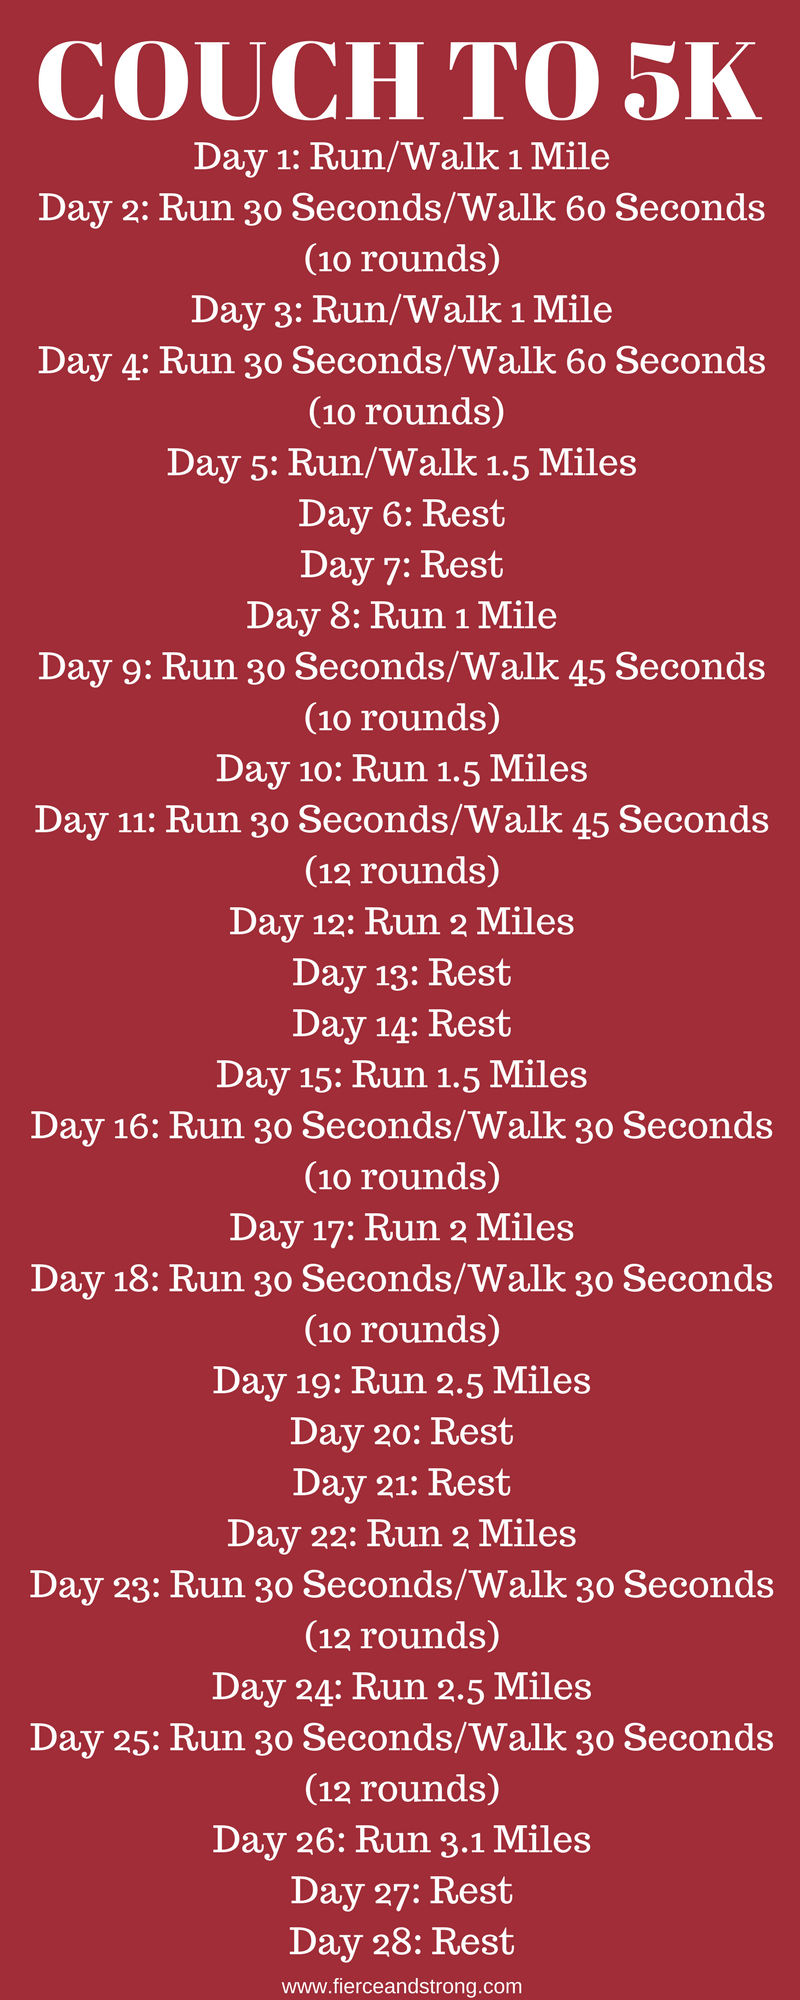 Couch to 5k 28 Day Training Plan - FIERCE AND STRONG - Couch to 5k 28 Day Training Plan - FIERCE AND STRONG -   19 fitness Training plan ideas